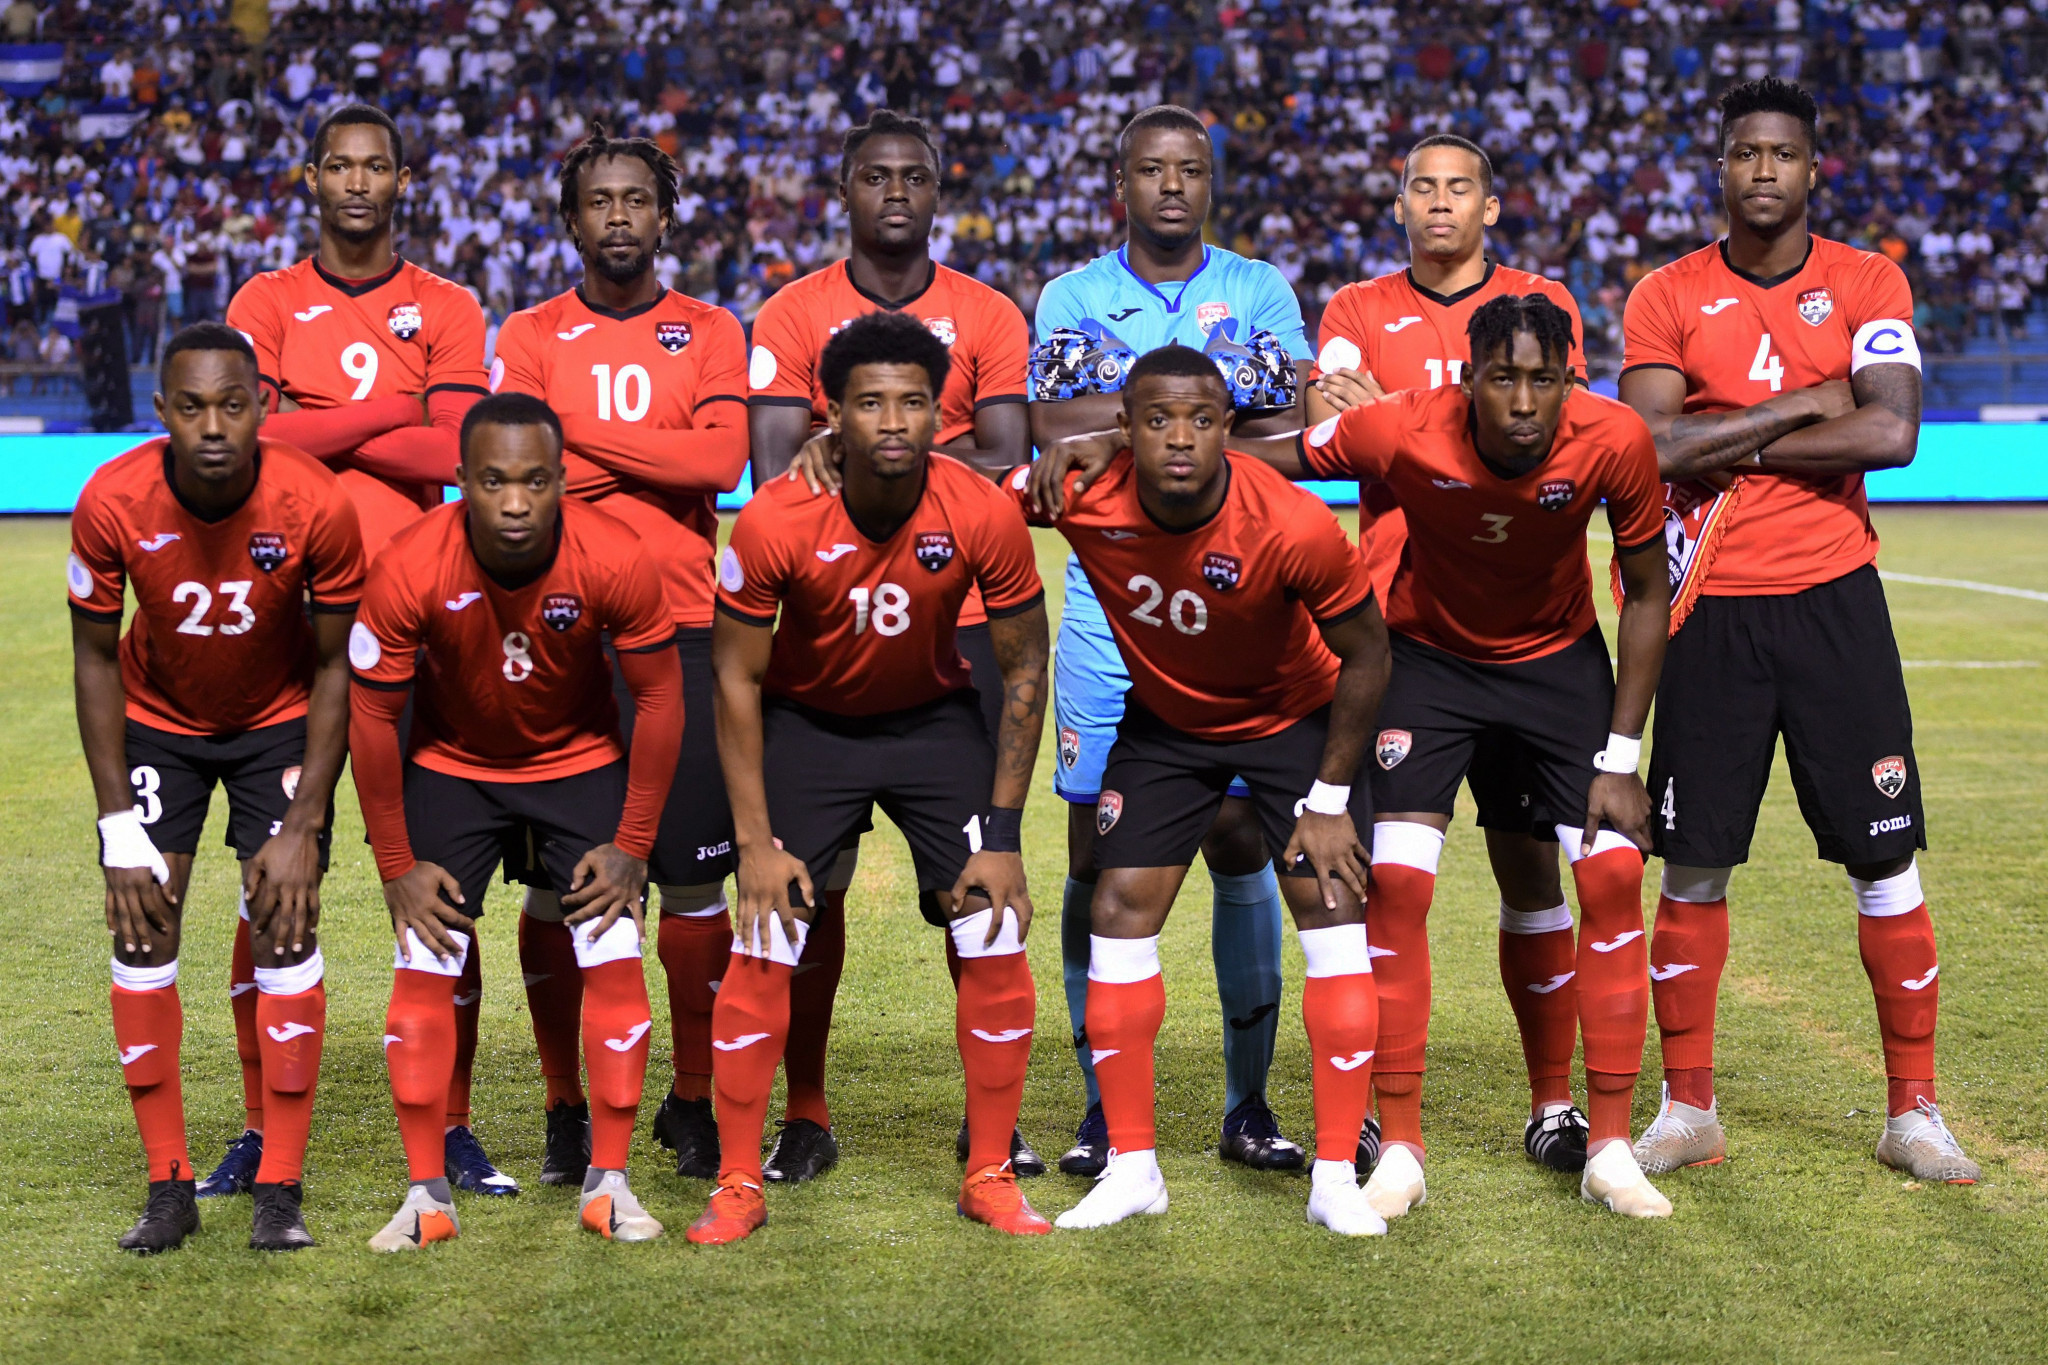 Football in Trinidad and Tobago is reportedly facing severe debt ©Getty Images